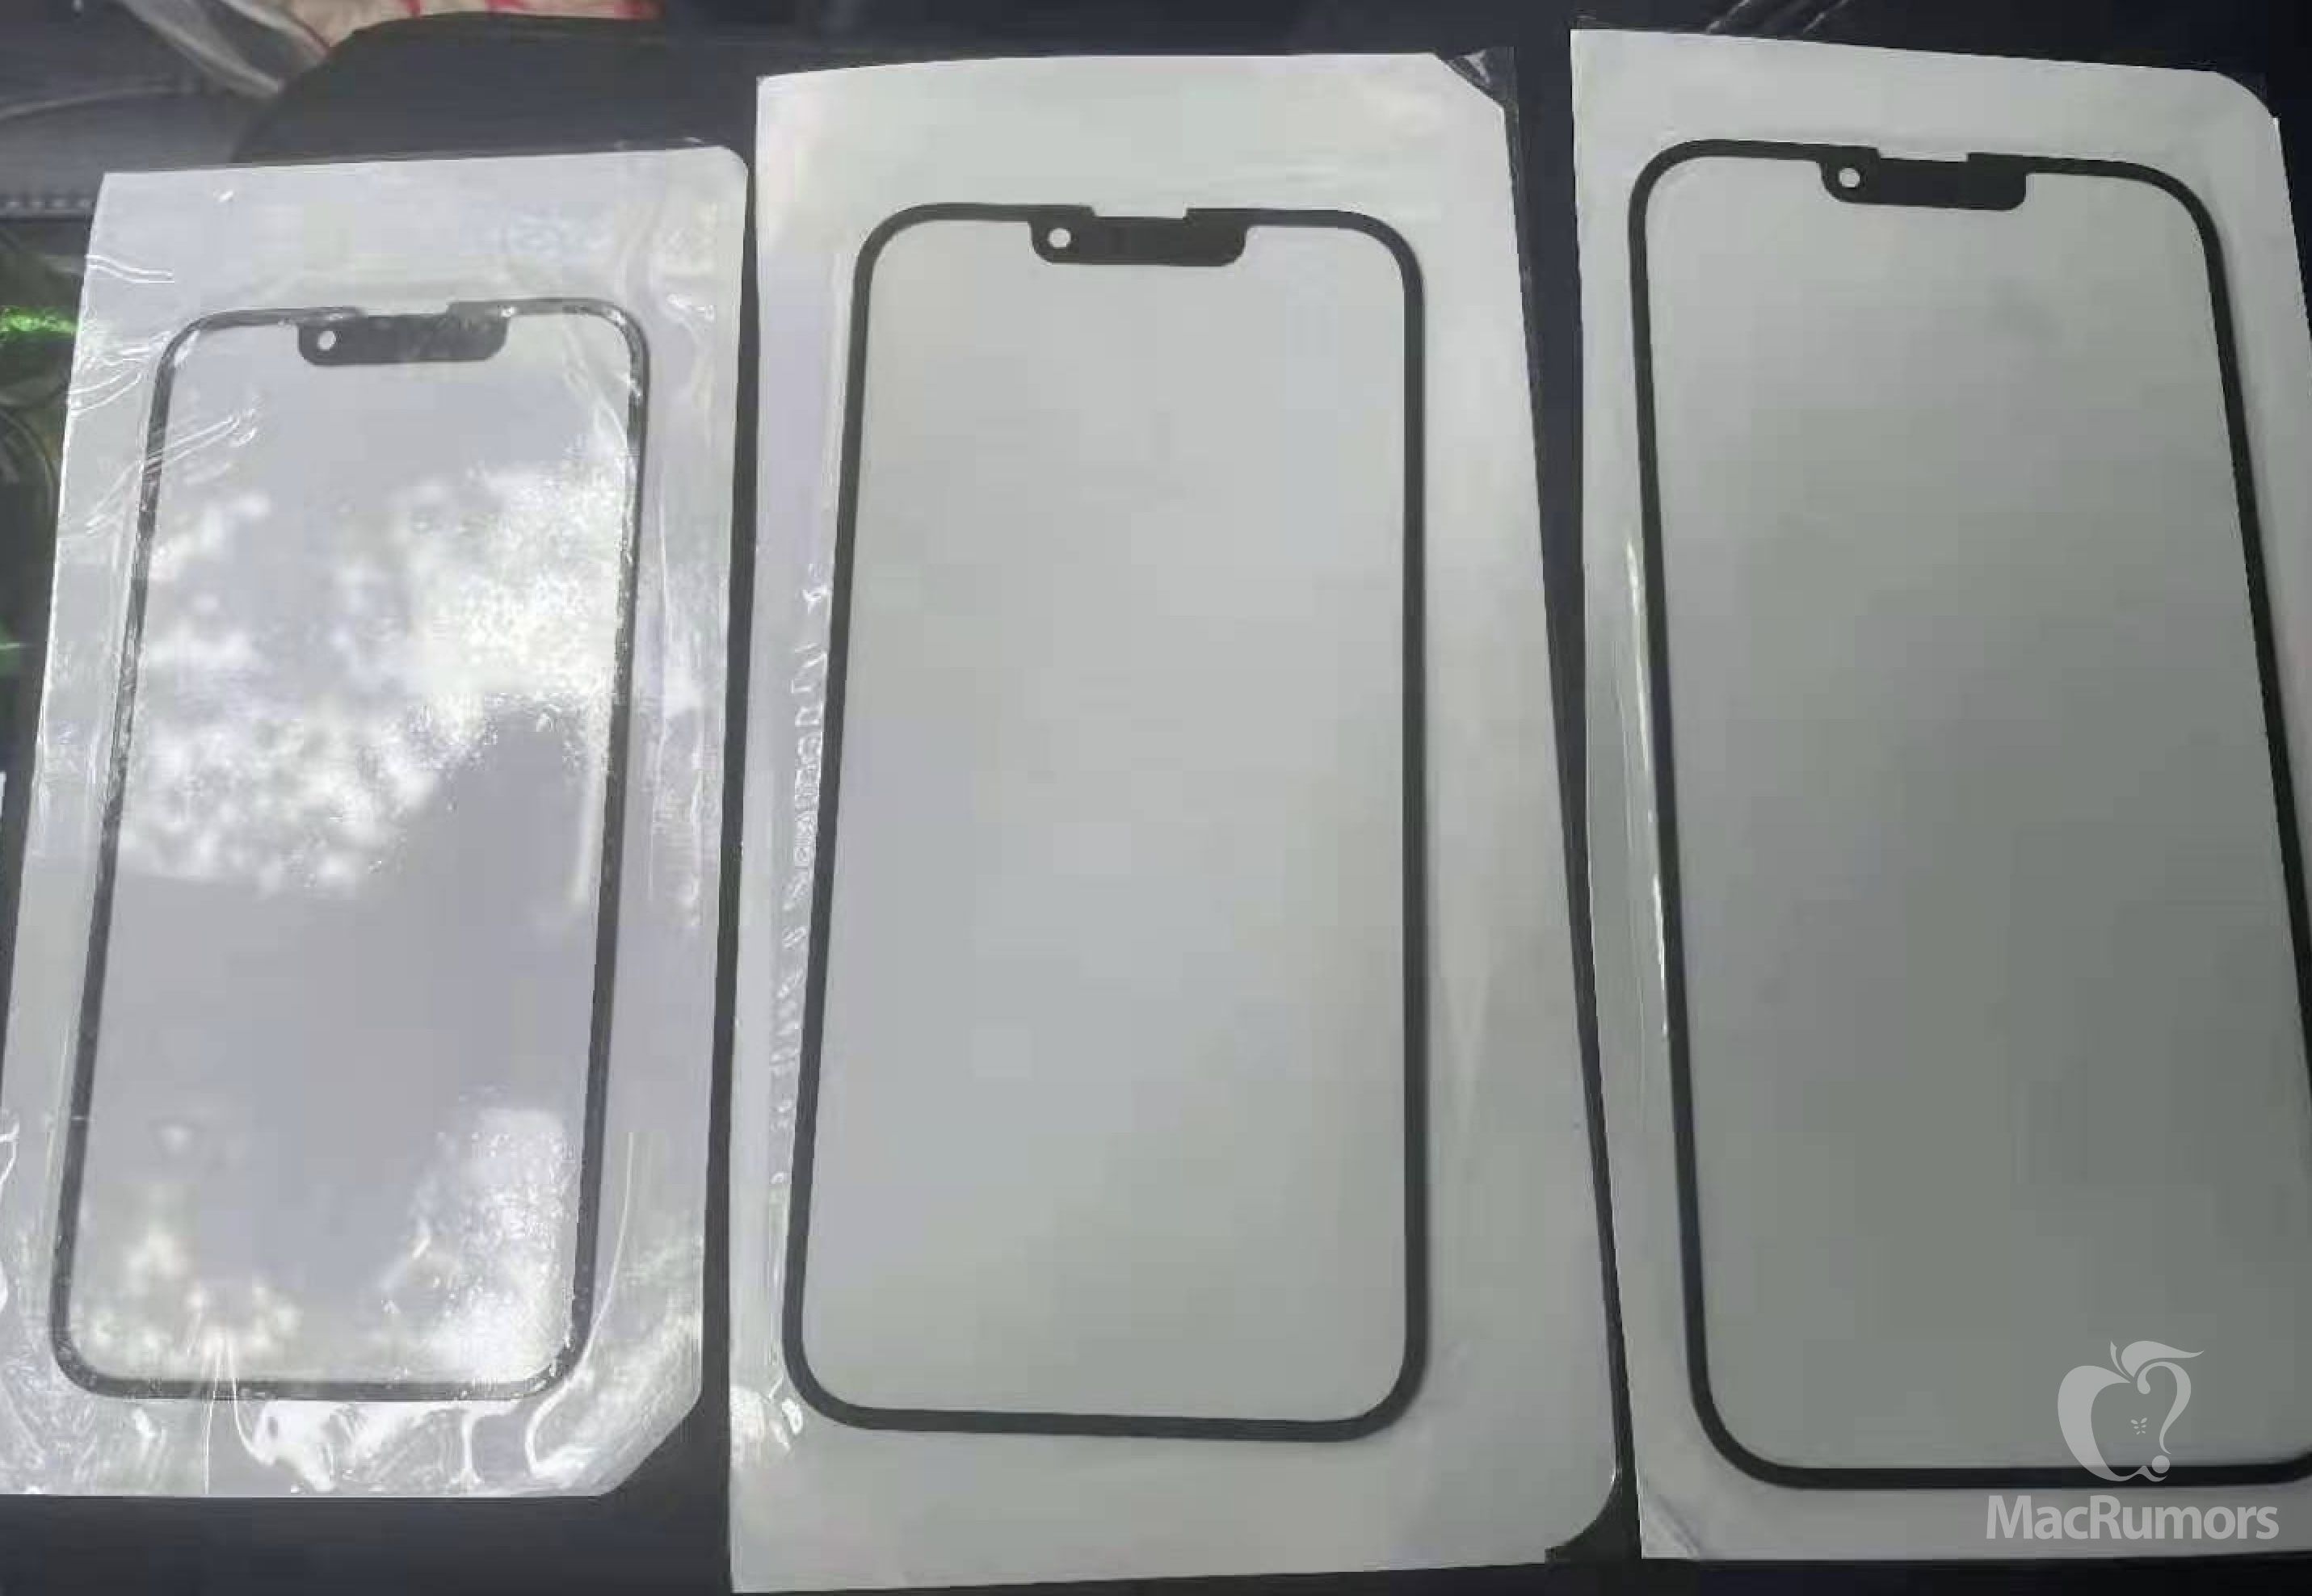 iPhone 13 front glass reveals smaller notch with earpiece moved to top